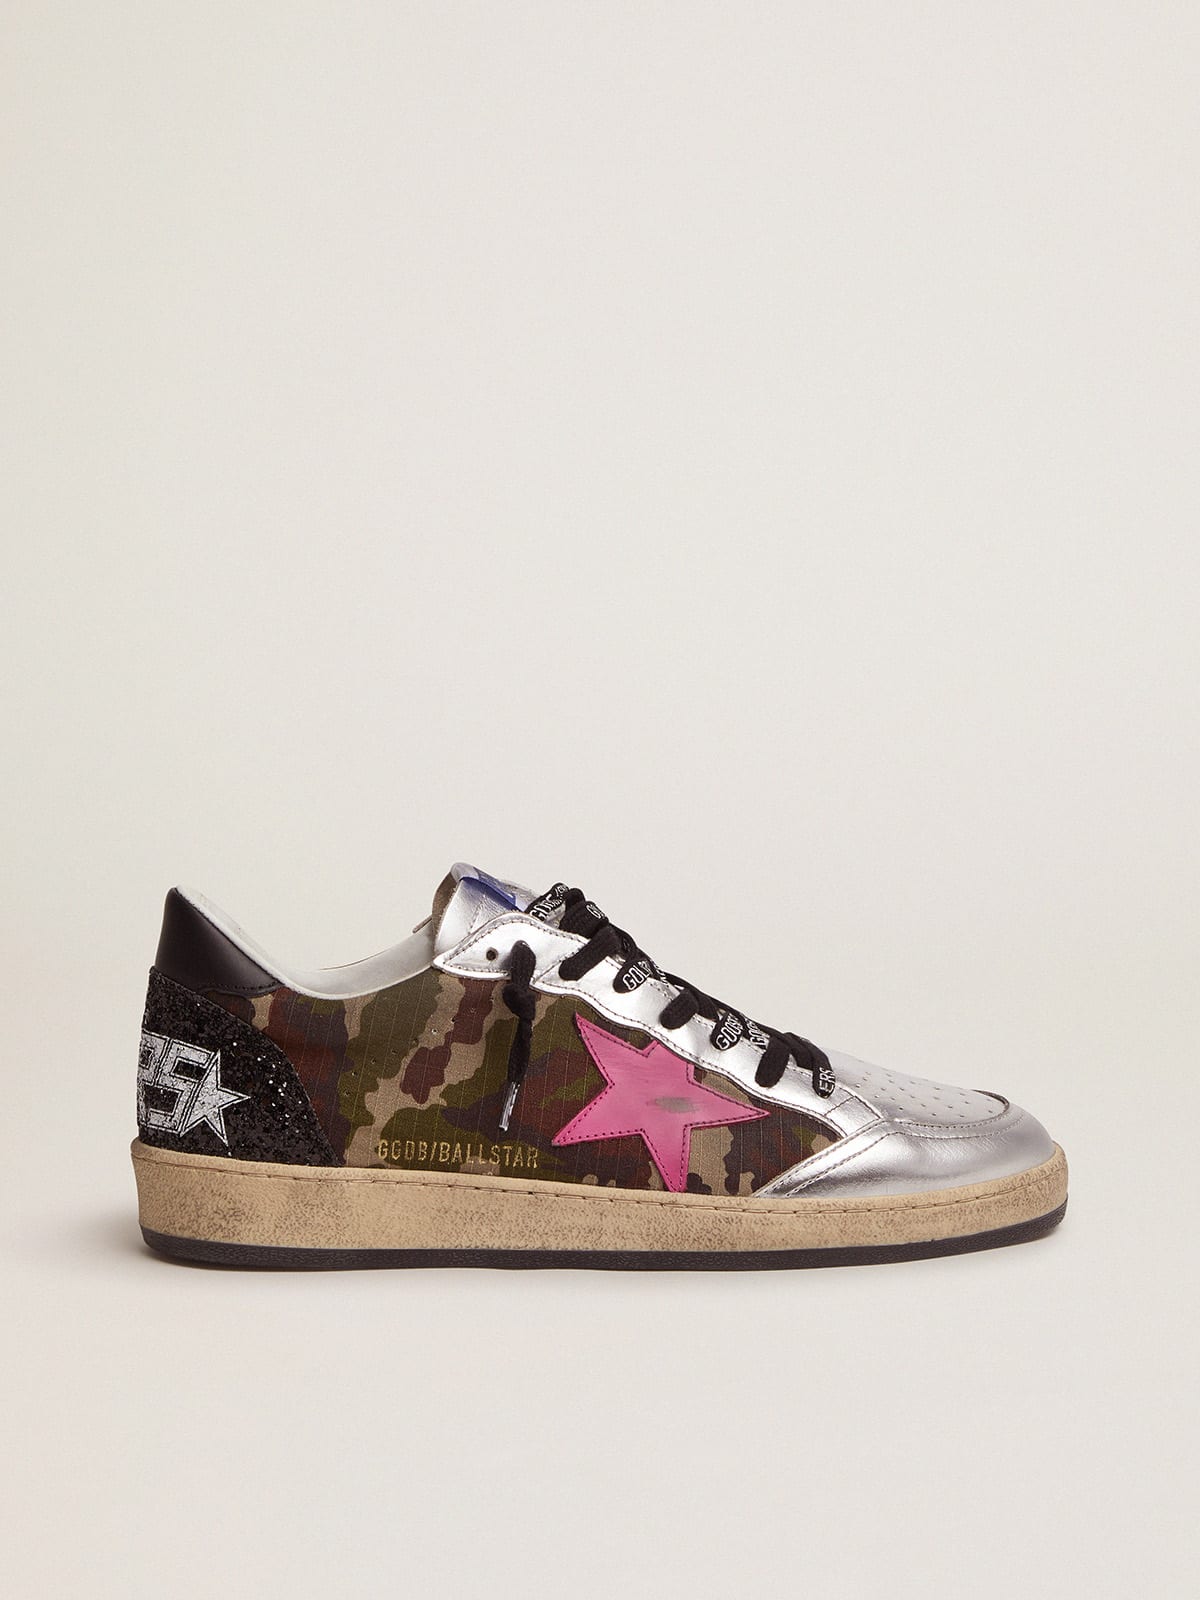 Golden Goose - Ball Star LTD sneakers with camouflage print and fuchsia star in 